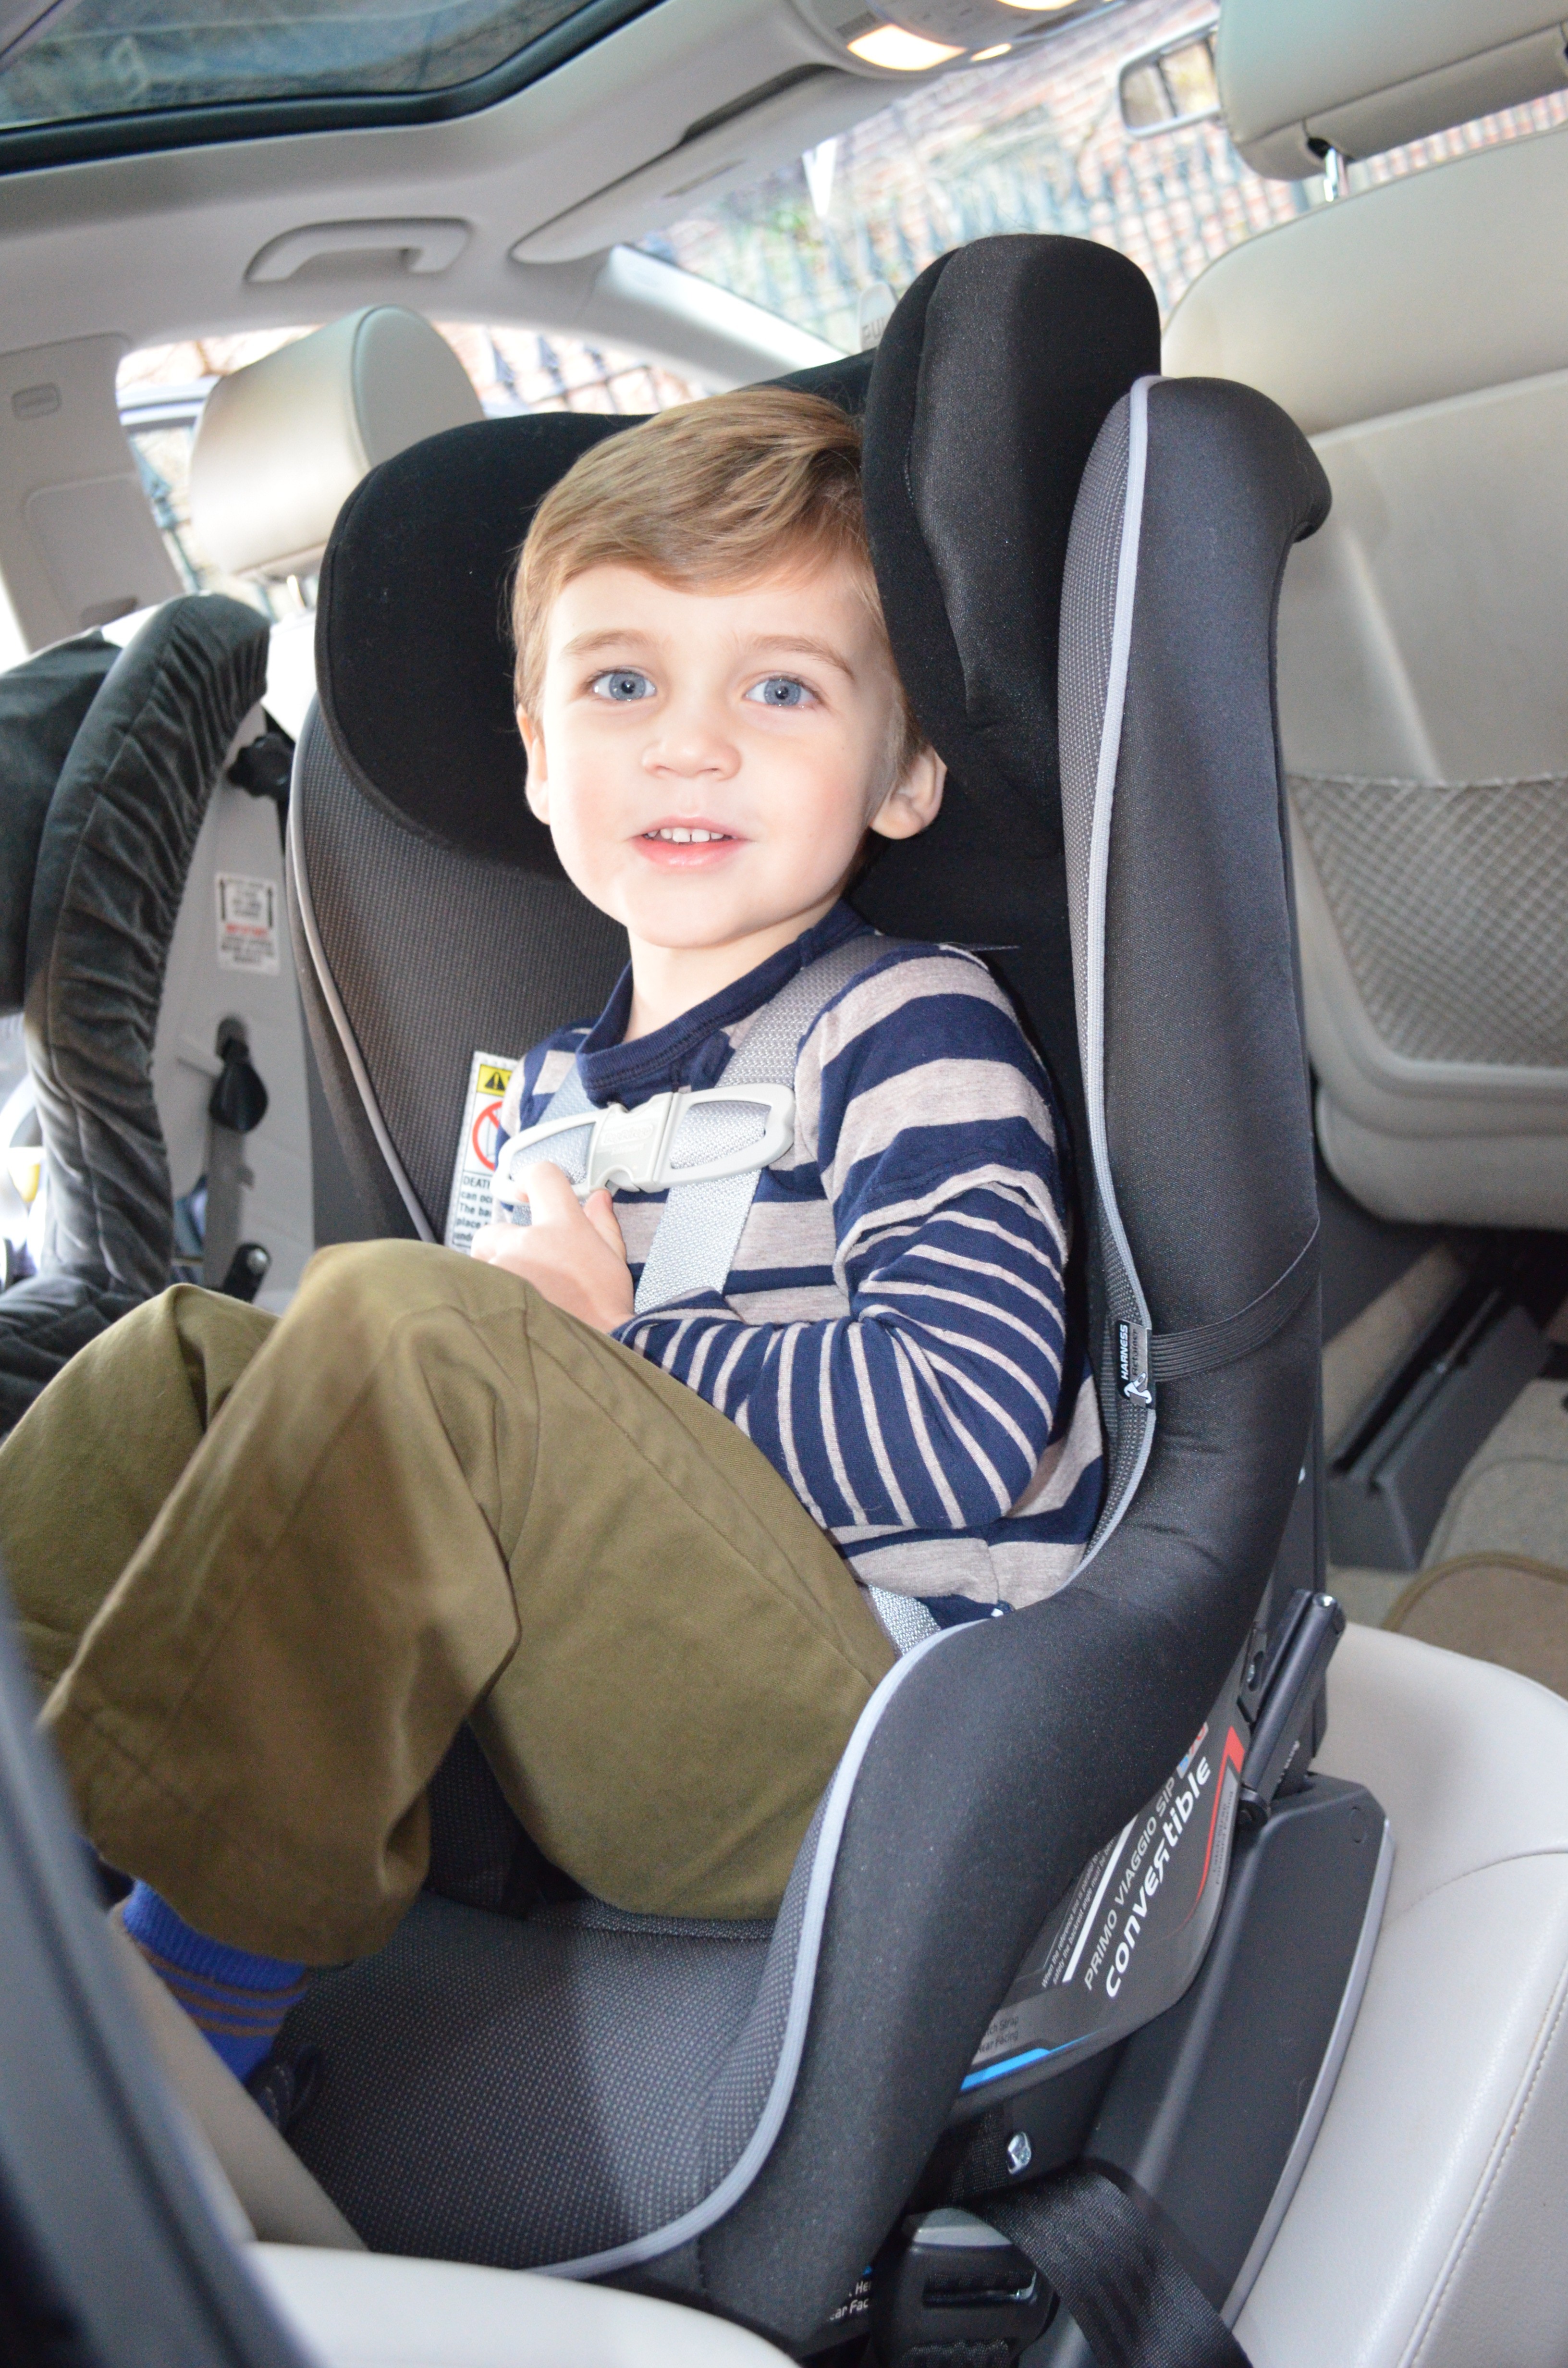 Your Child Turn Forward Facing, At What Age Should The Car Seat Face Forward